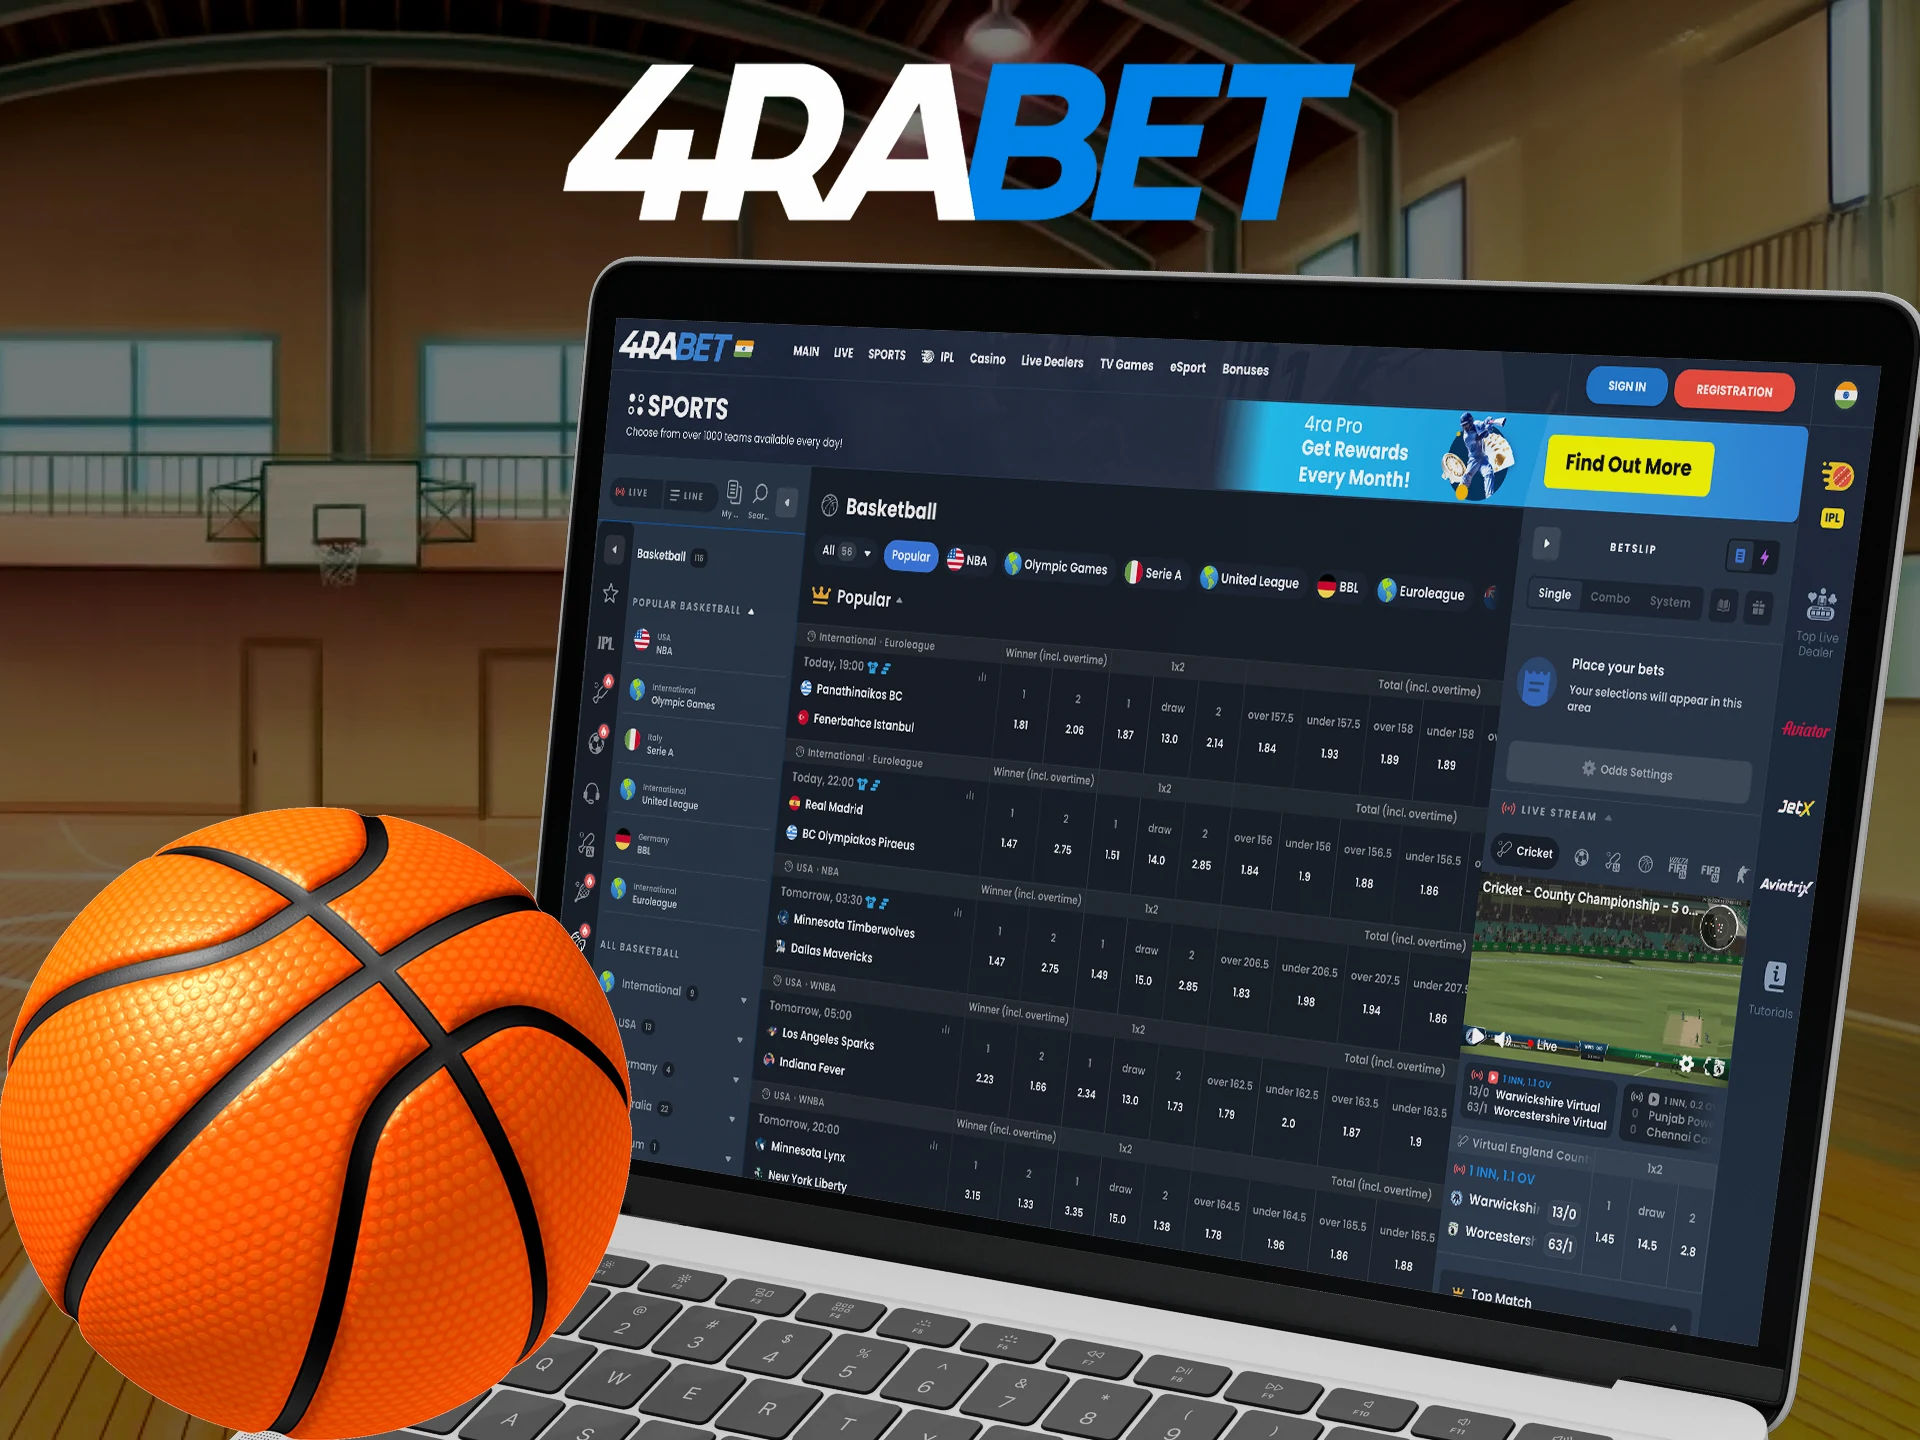 Choose the right bet on Besketball at 4RaBet.